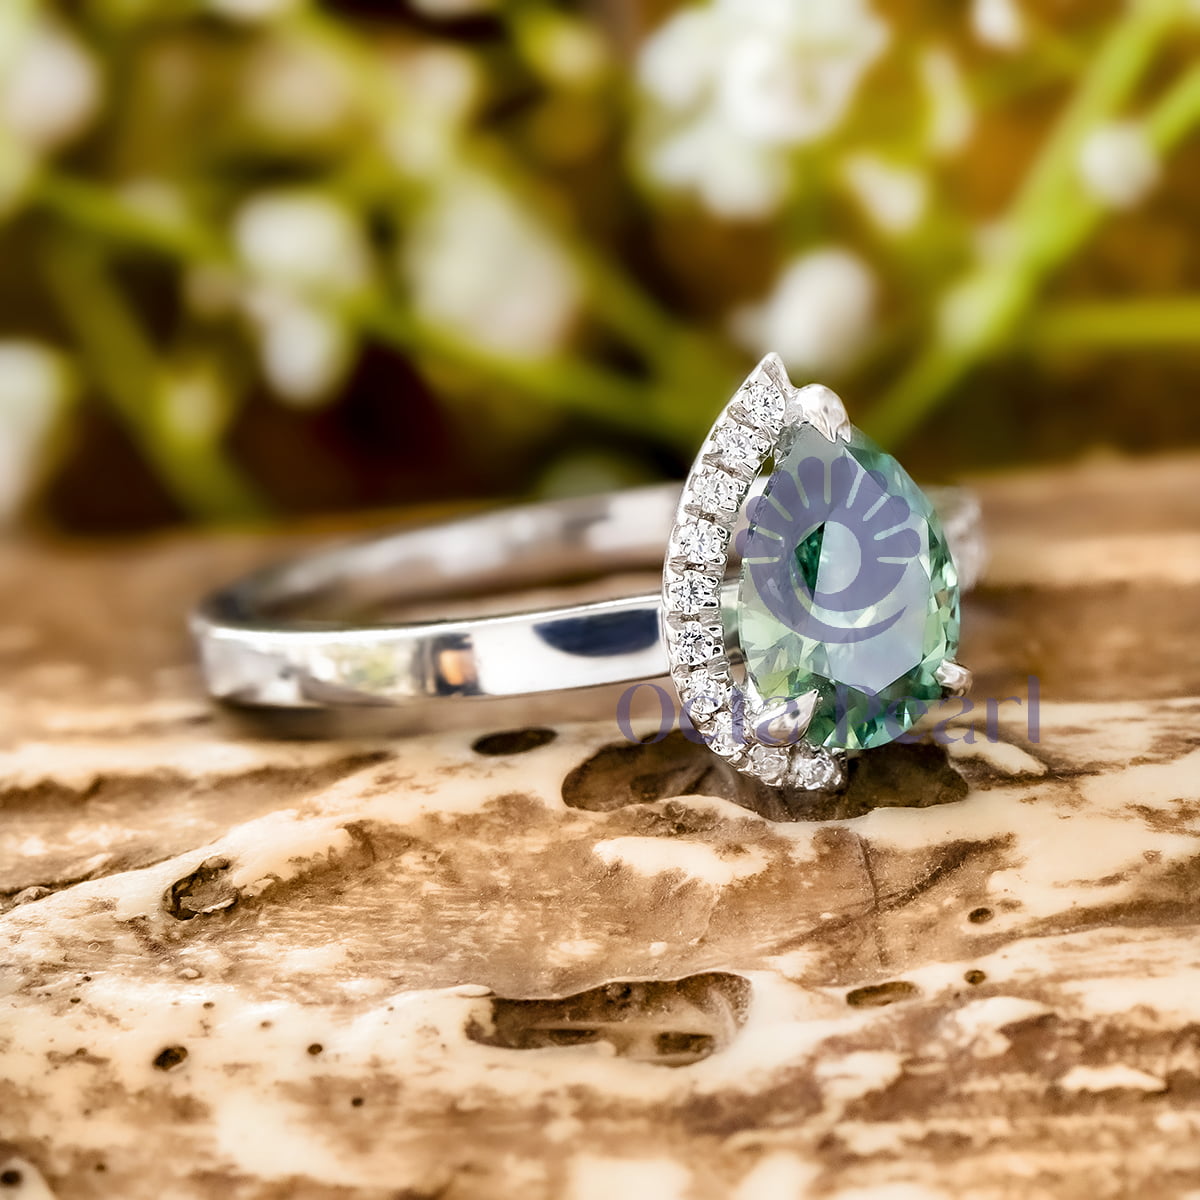 8.70x6.20 MM Green Pear Cut CZ Stone Prong Set Half Halo Engagement & Wedding Ring For ladies